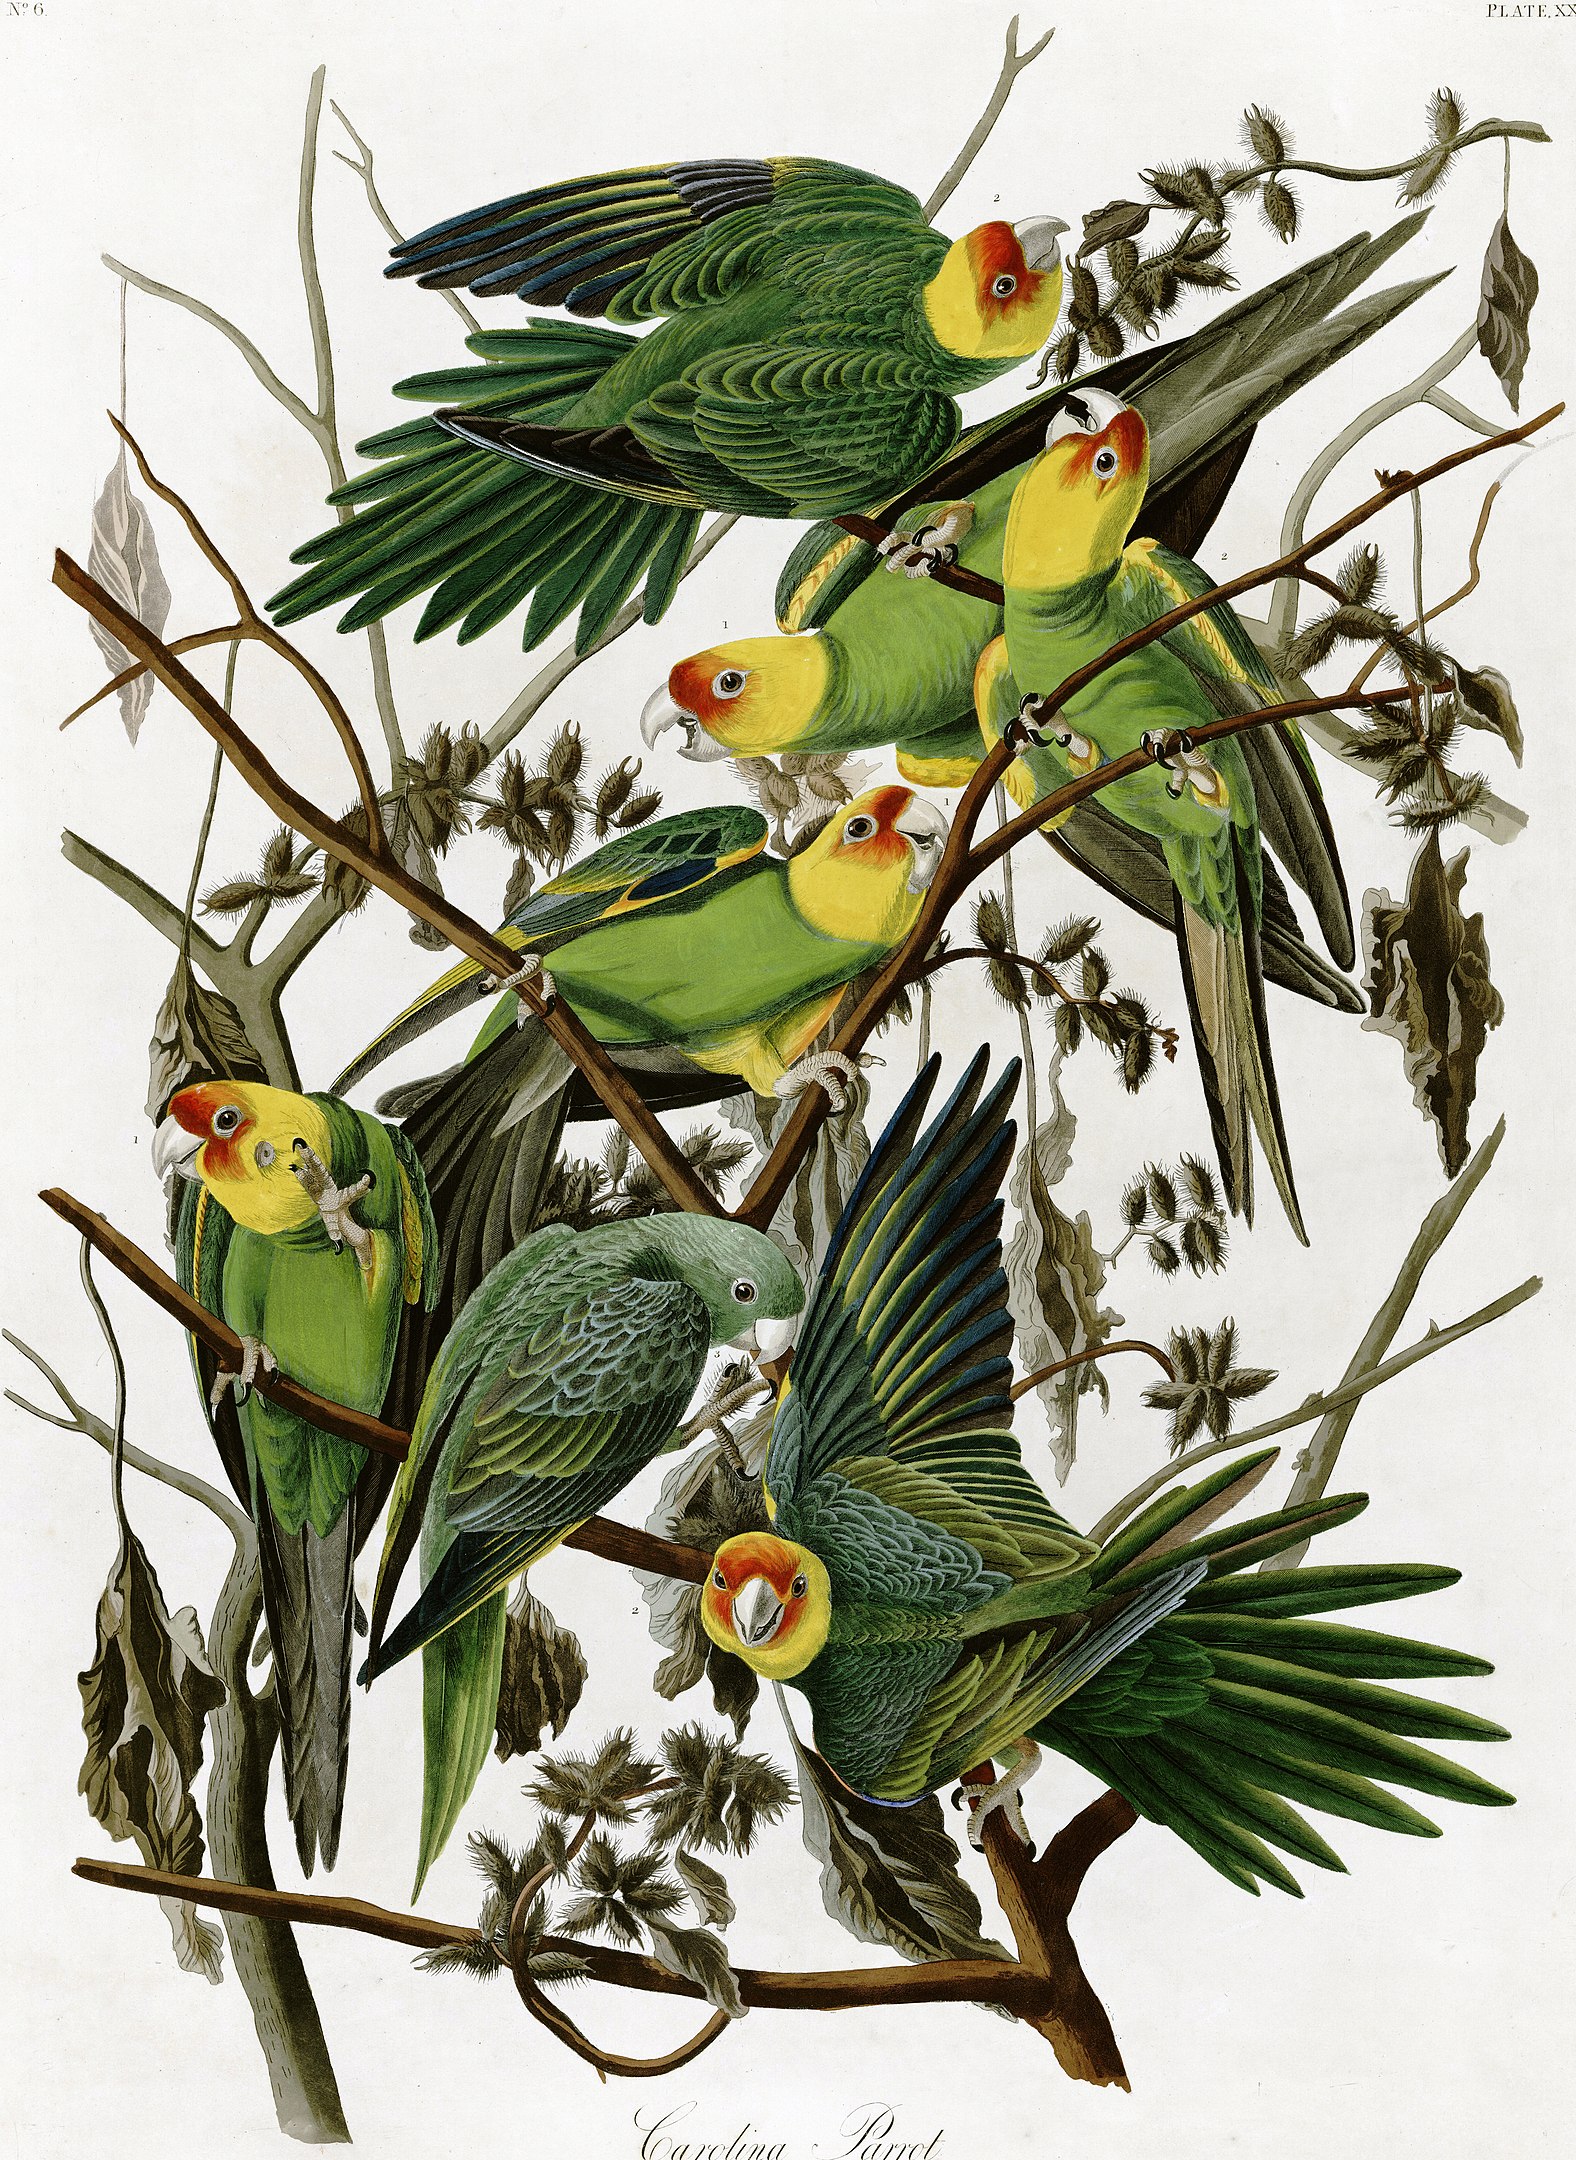 An illustration of several parakeets perched on tree branches